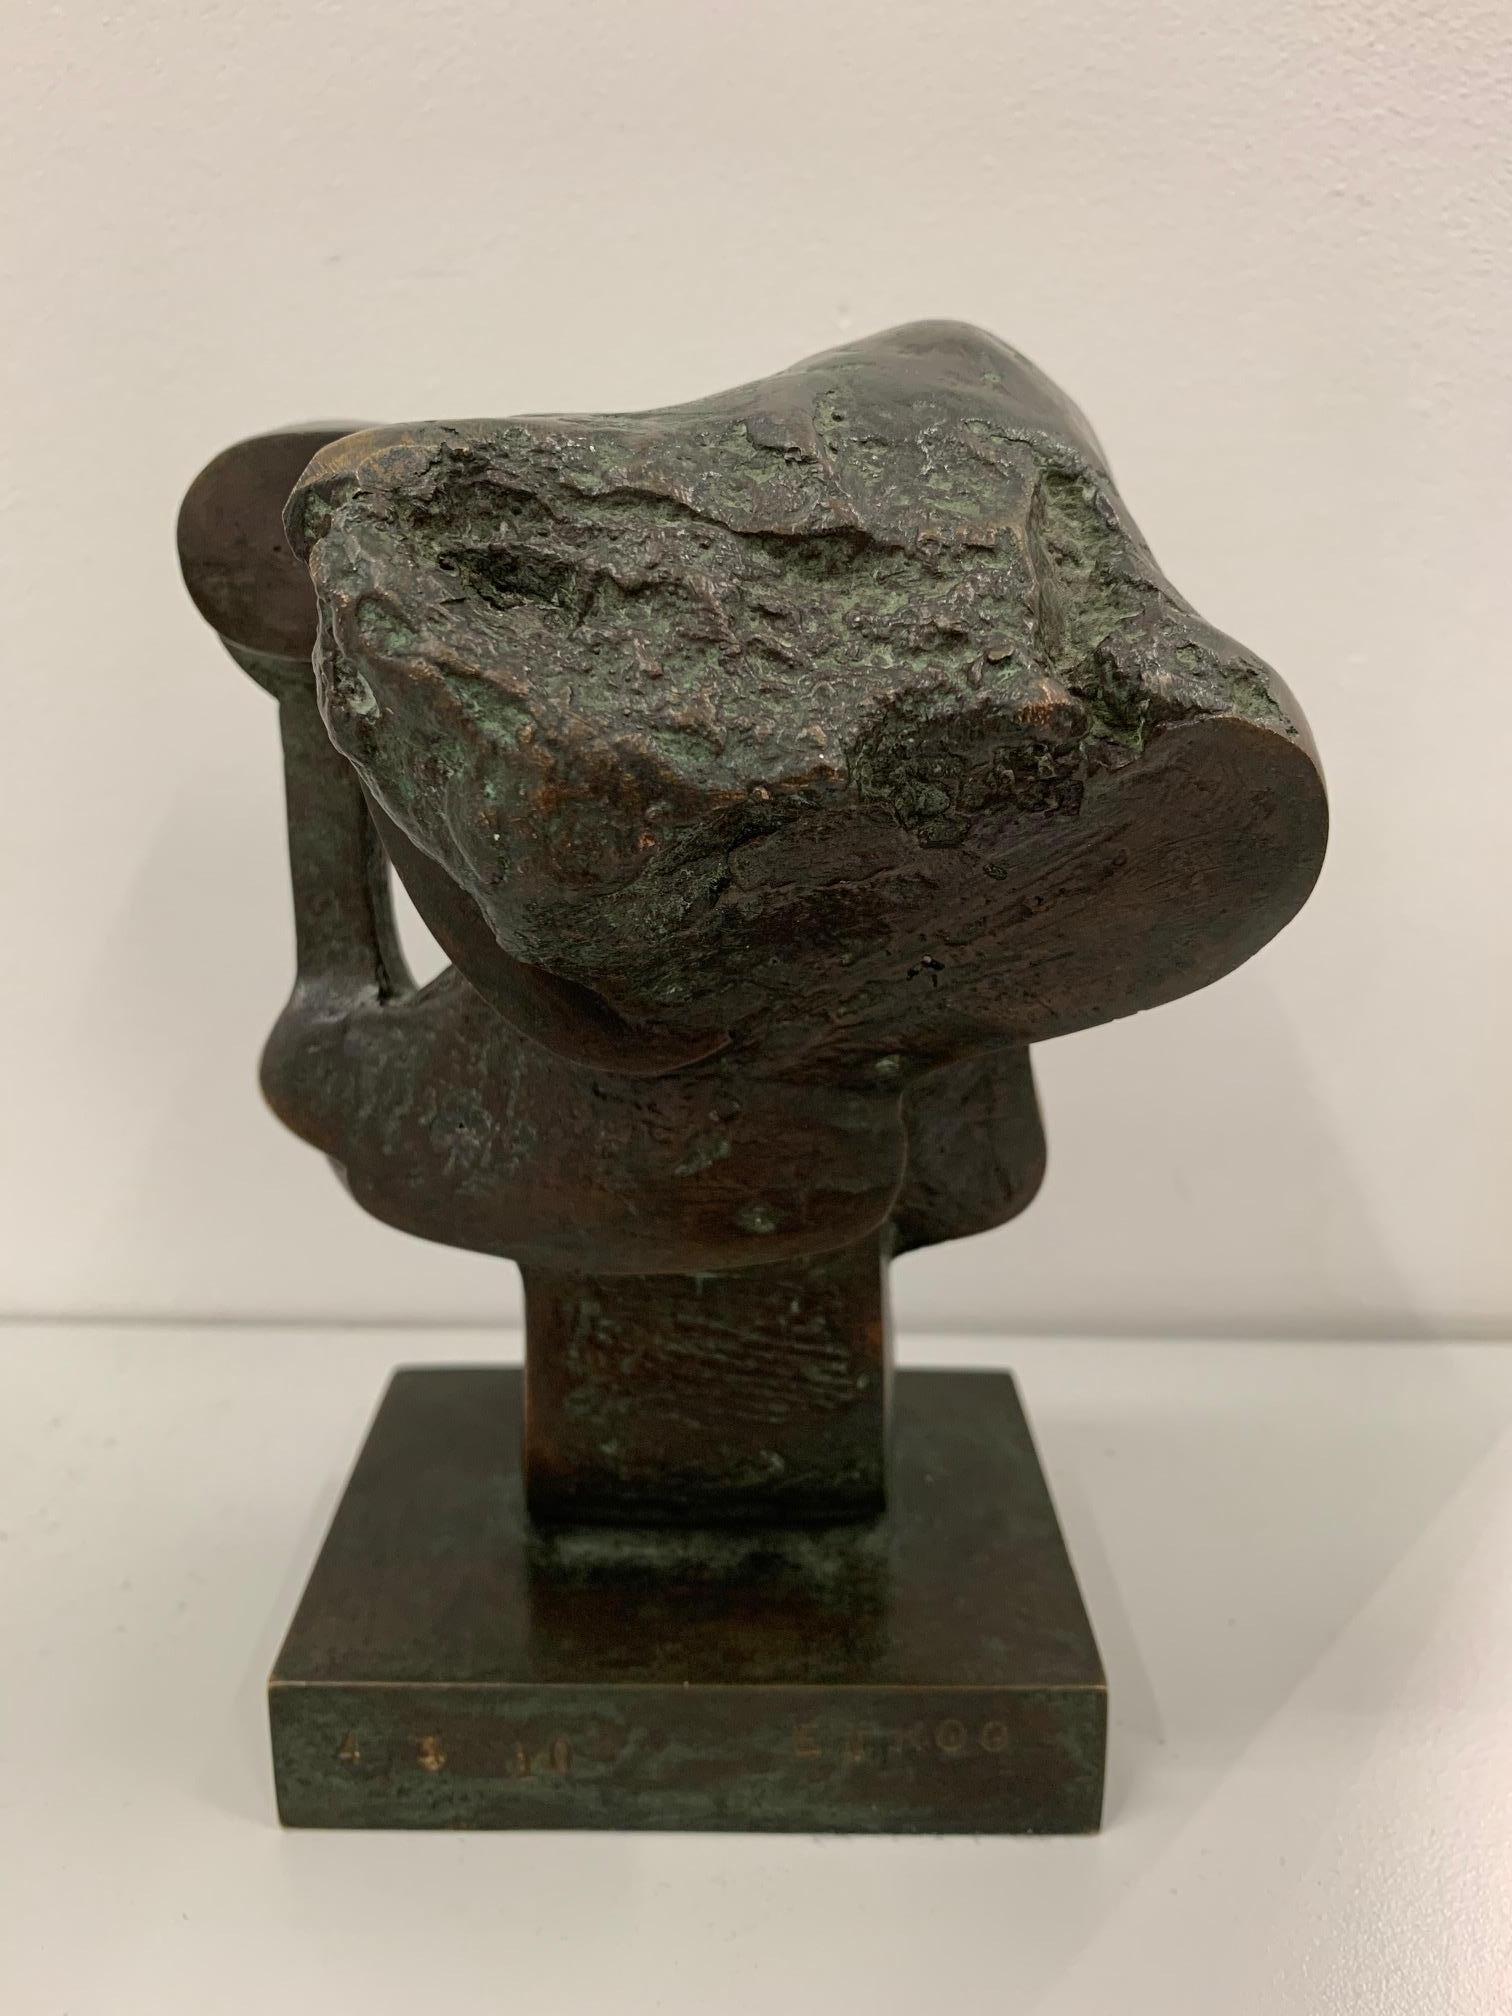 This is modern, abstract, geometric and biomorphic sculpture by famous Canadian sculptor Sorel Etrog, depicts an abstract, organic form of a head with look like the mechanics of a machine.  Edition 4 of 10. 

Sorel Etrog was a Canadian artist,